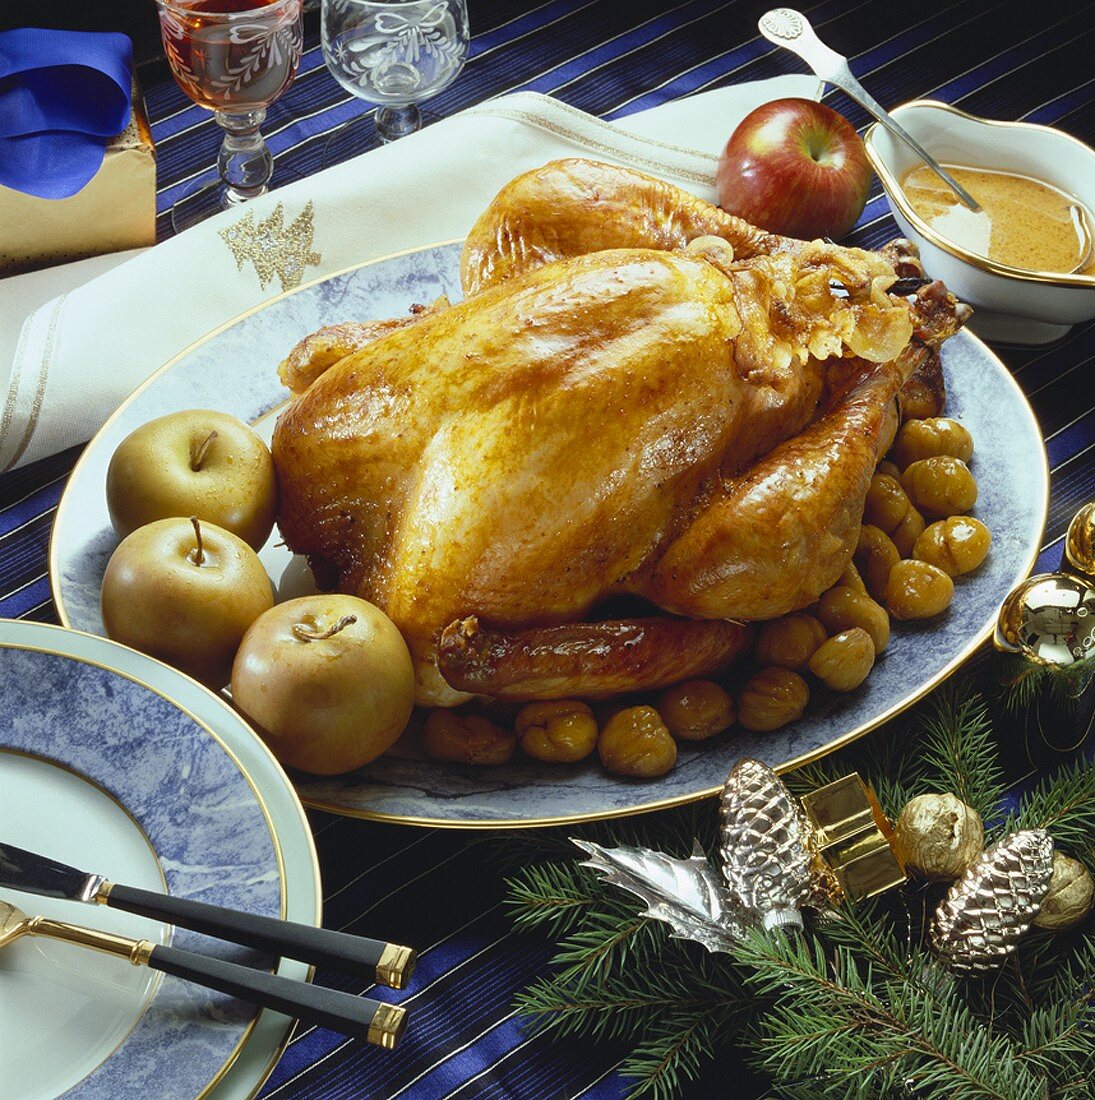 Stuffed turkey with chestnuts & apples, Xmas decorations